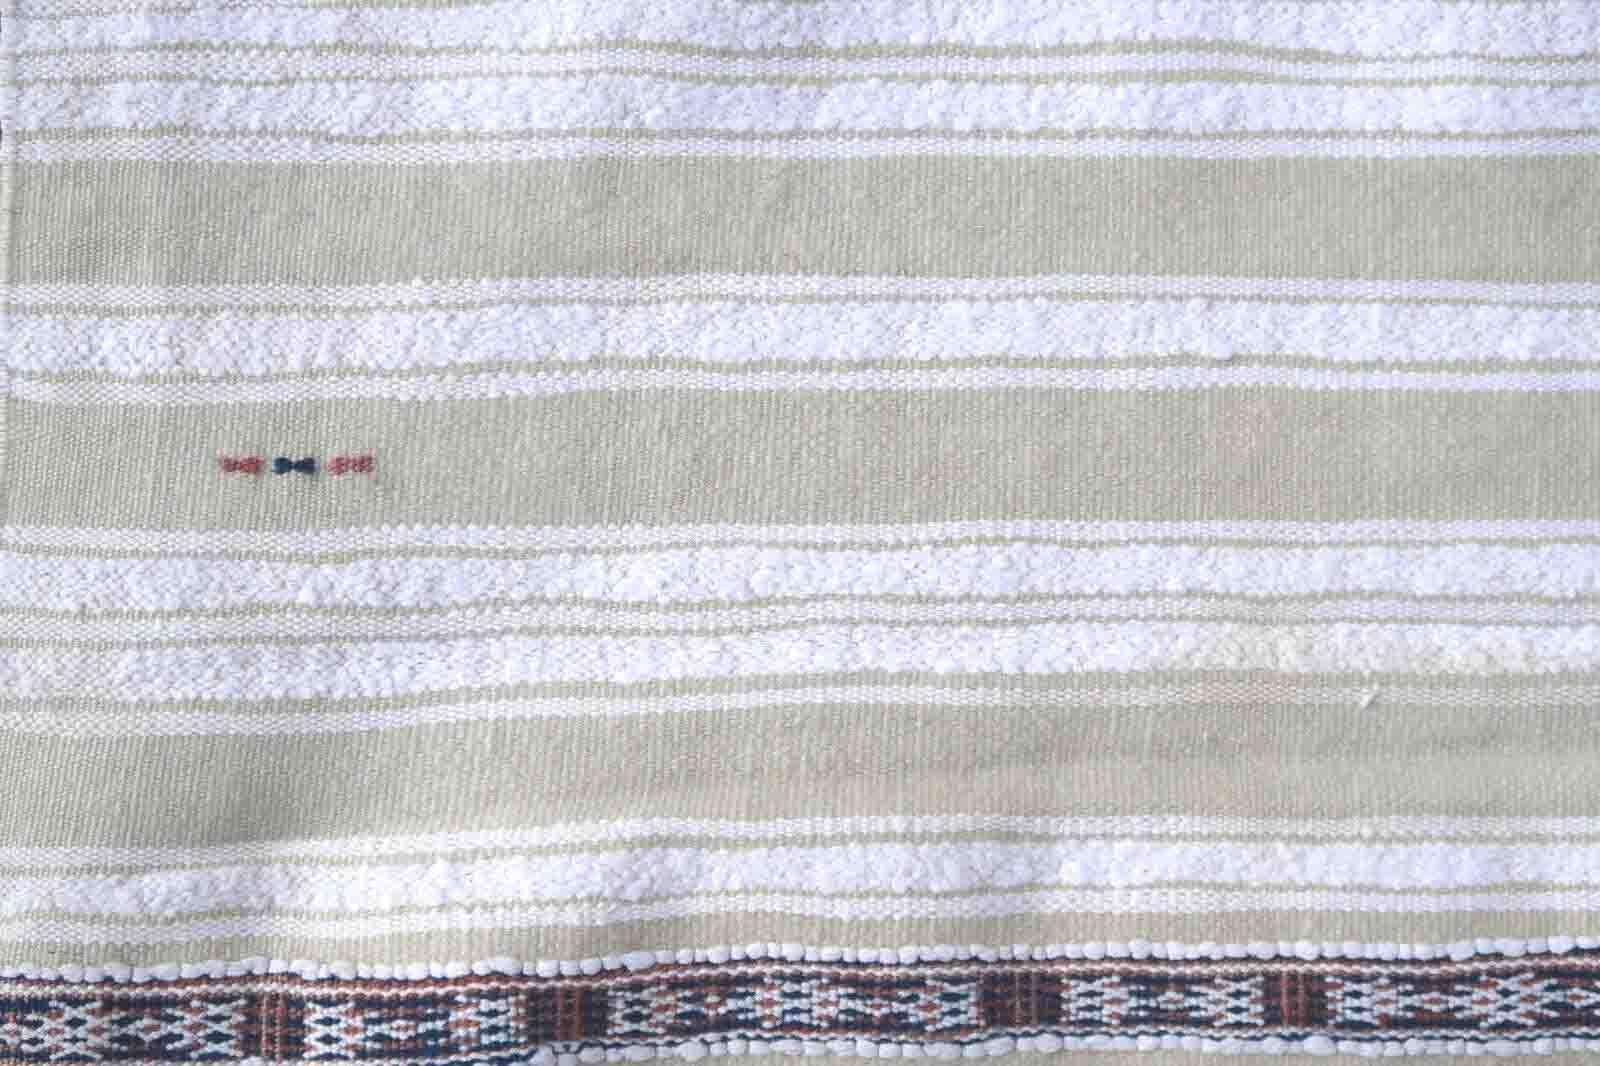 Handmade vintage Moroccan woolen kilim in white color with the stripes. This flatweave is from the middle of 20th century in original good condition.

-condition: original good,

-circa: 1950s,

-size: 3.7' x 5.7' (113cm x